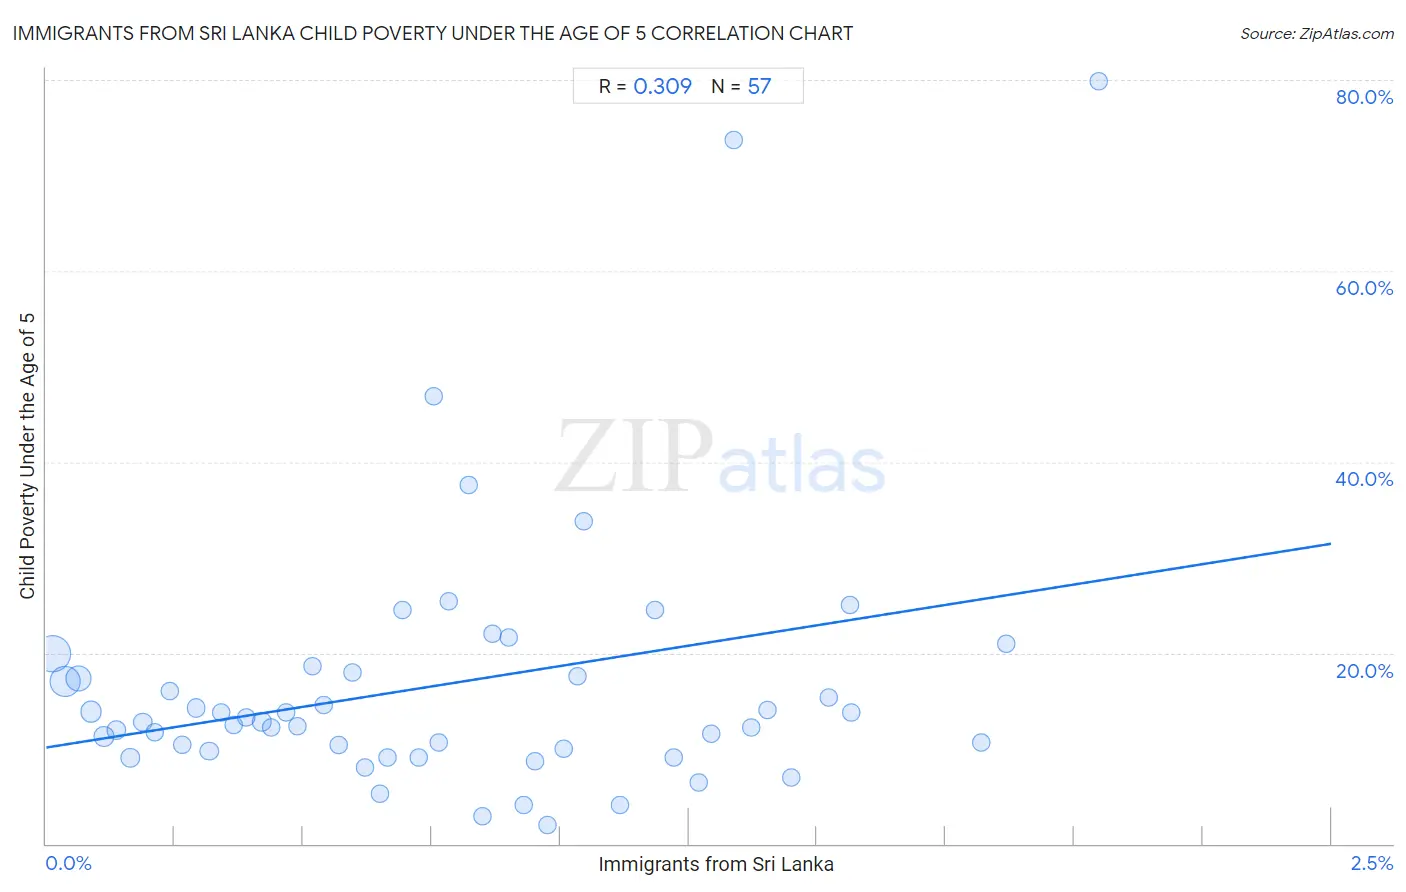 Immigrants from Sri Lanka Child Poverty Under the Age of 5